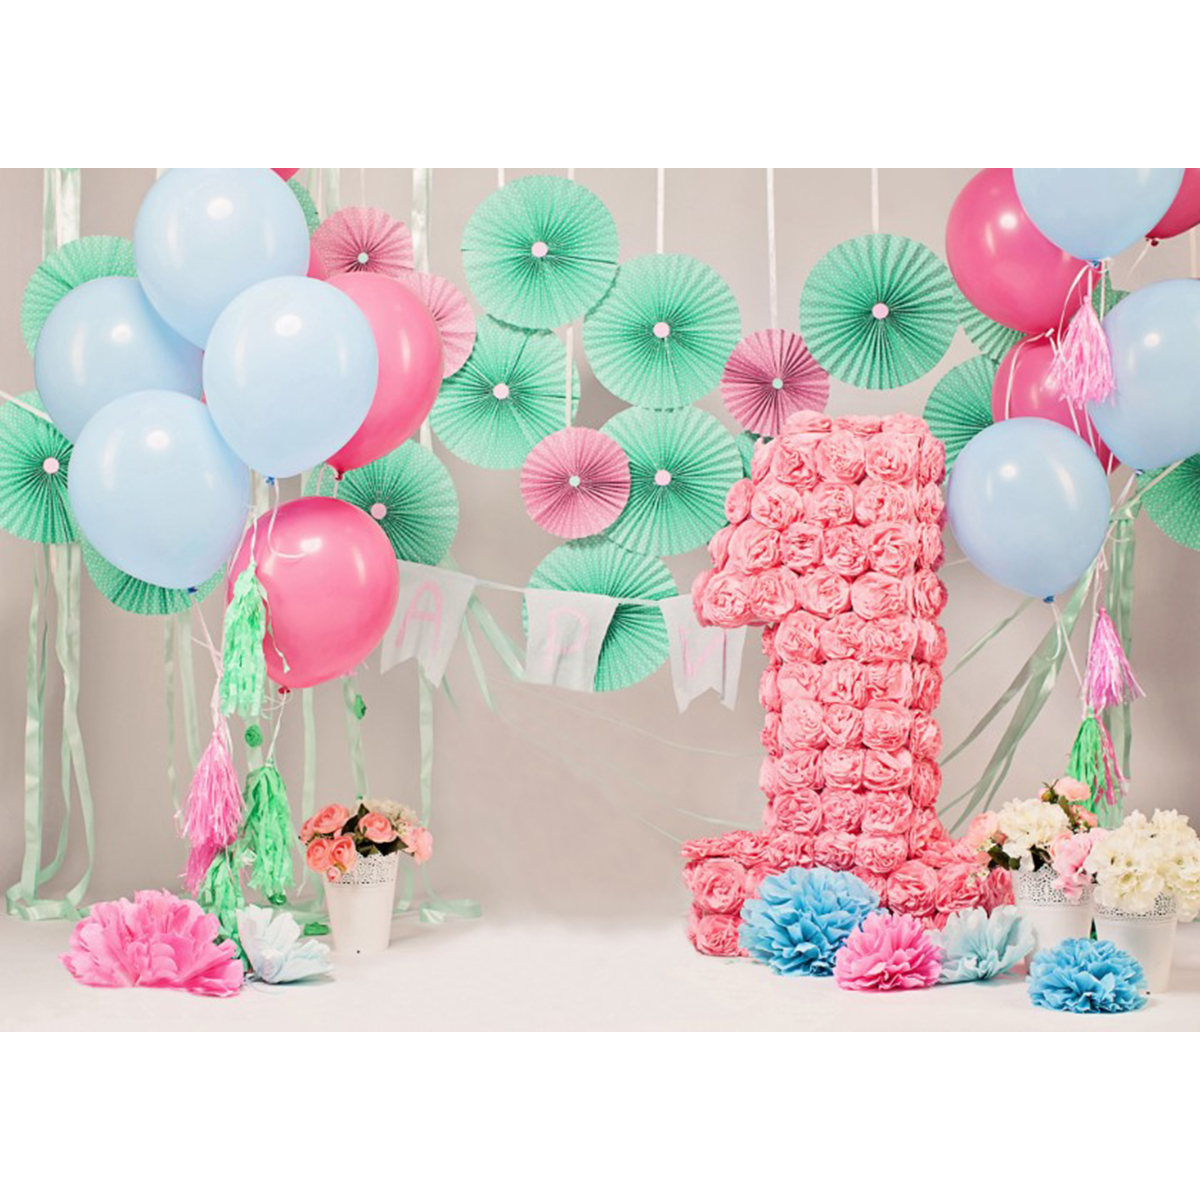 

5x7FT Vinyl Balloon One Year Old Party Photography Backdrop Background Studio Prop